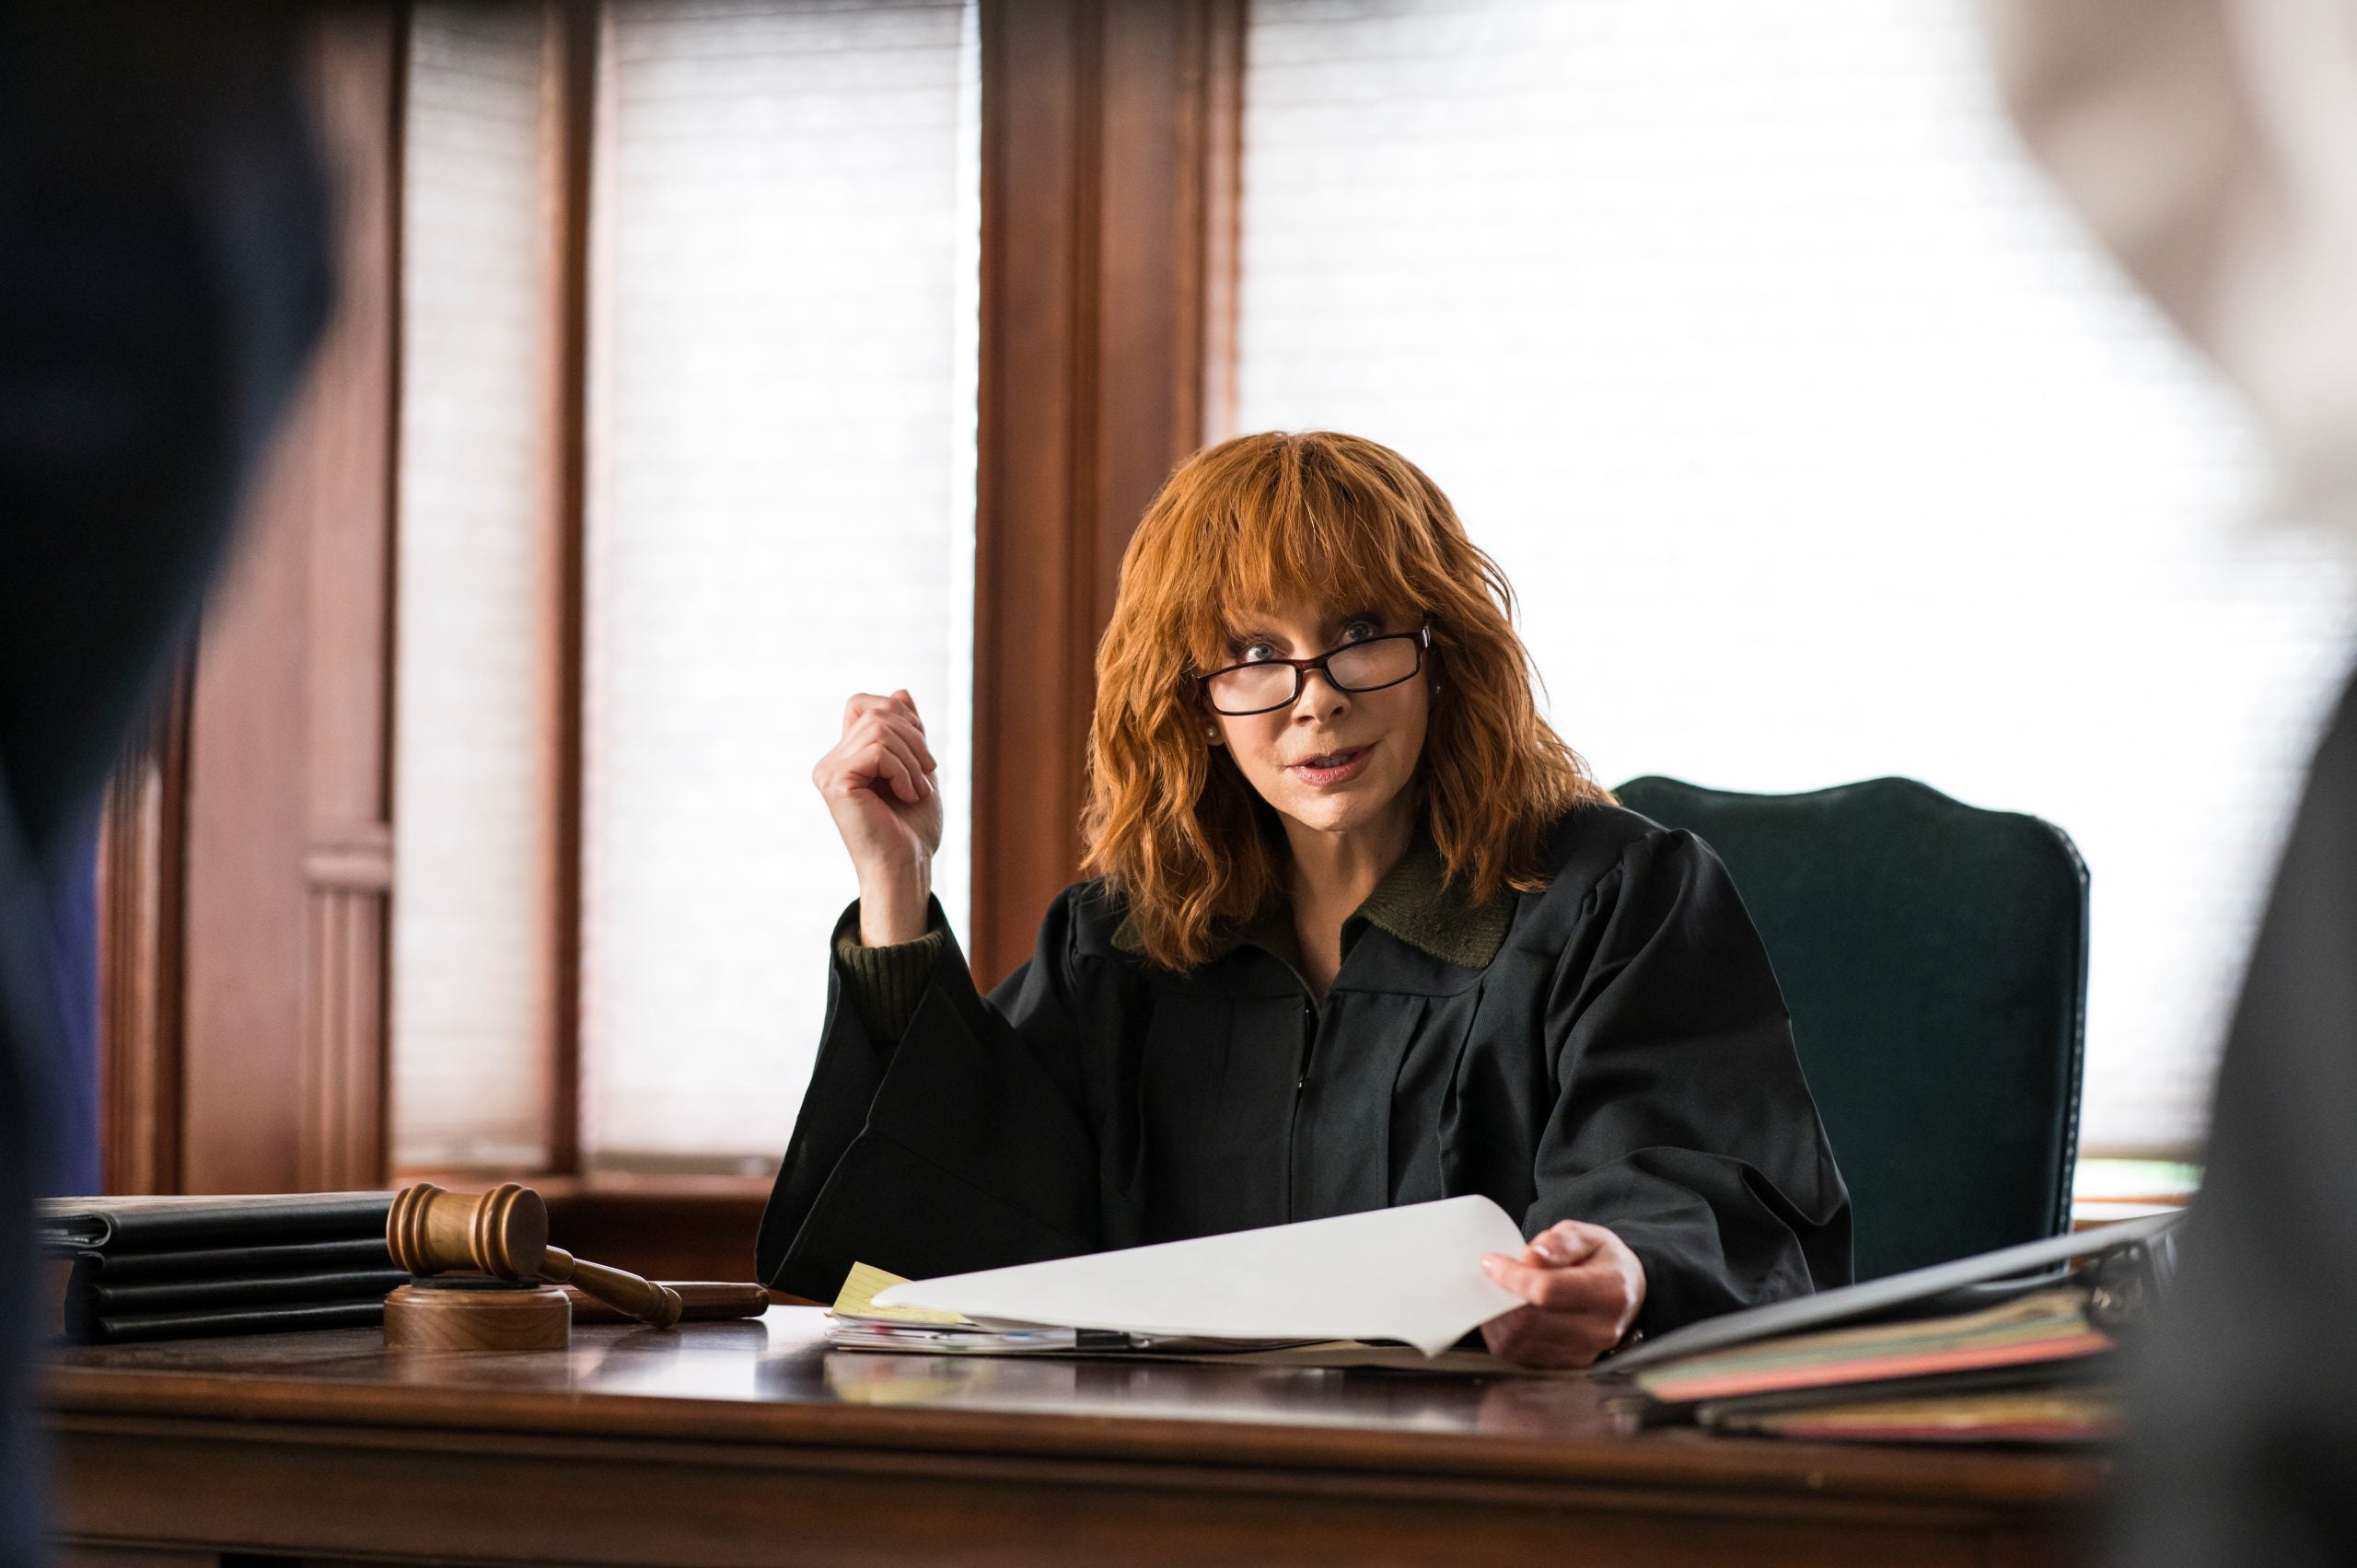 Reba McEntire wearing judge's robes in the Lifetime movie 'The Hammer'